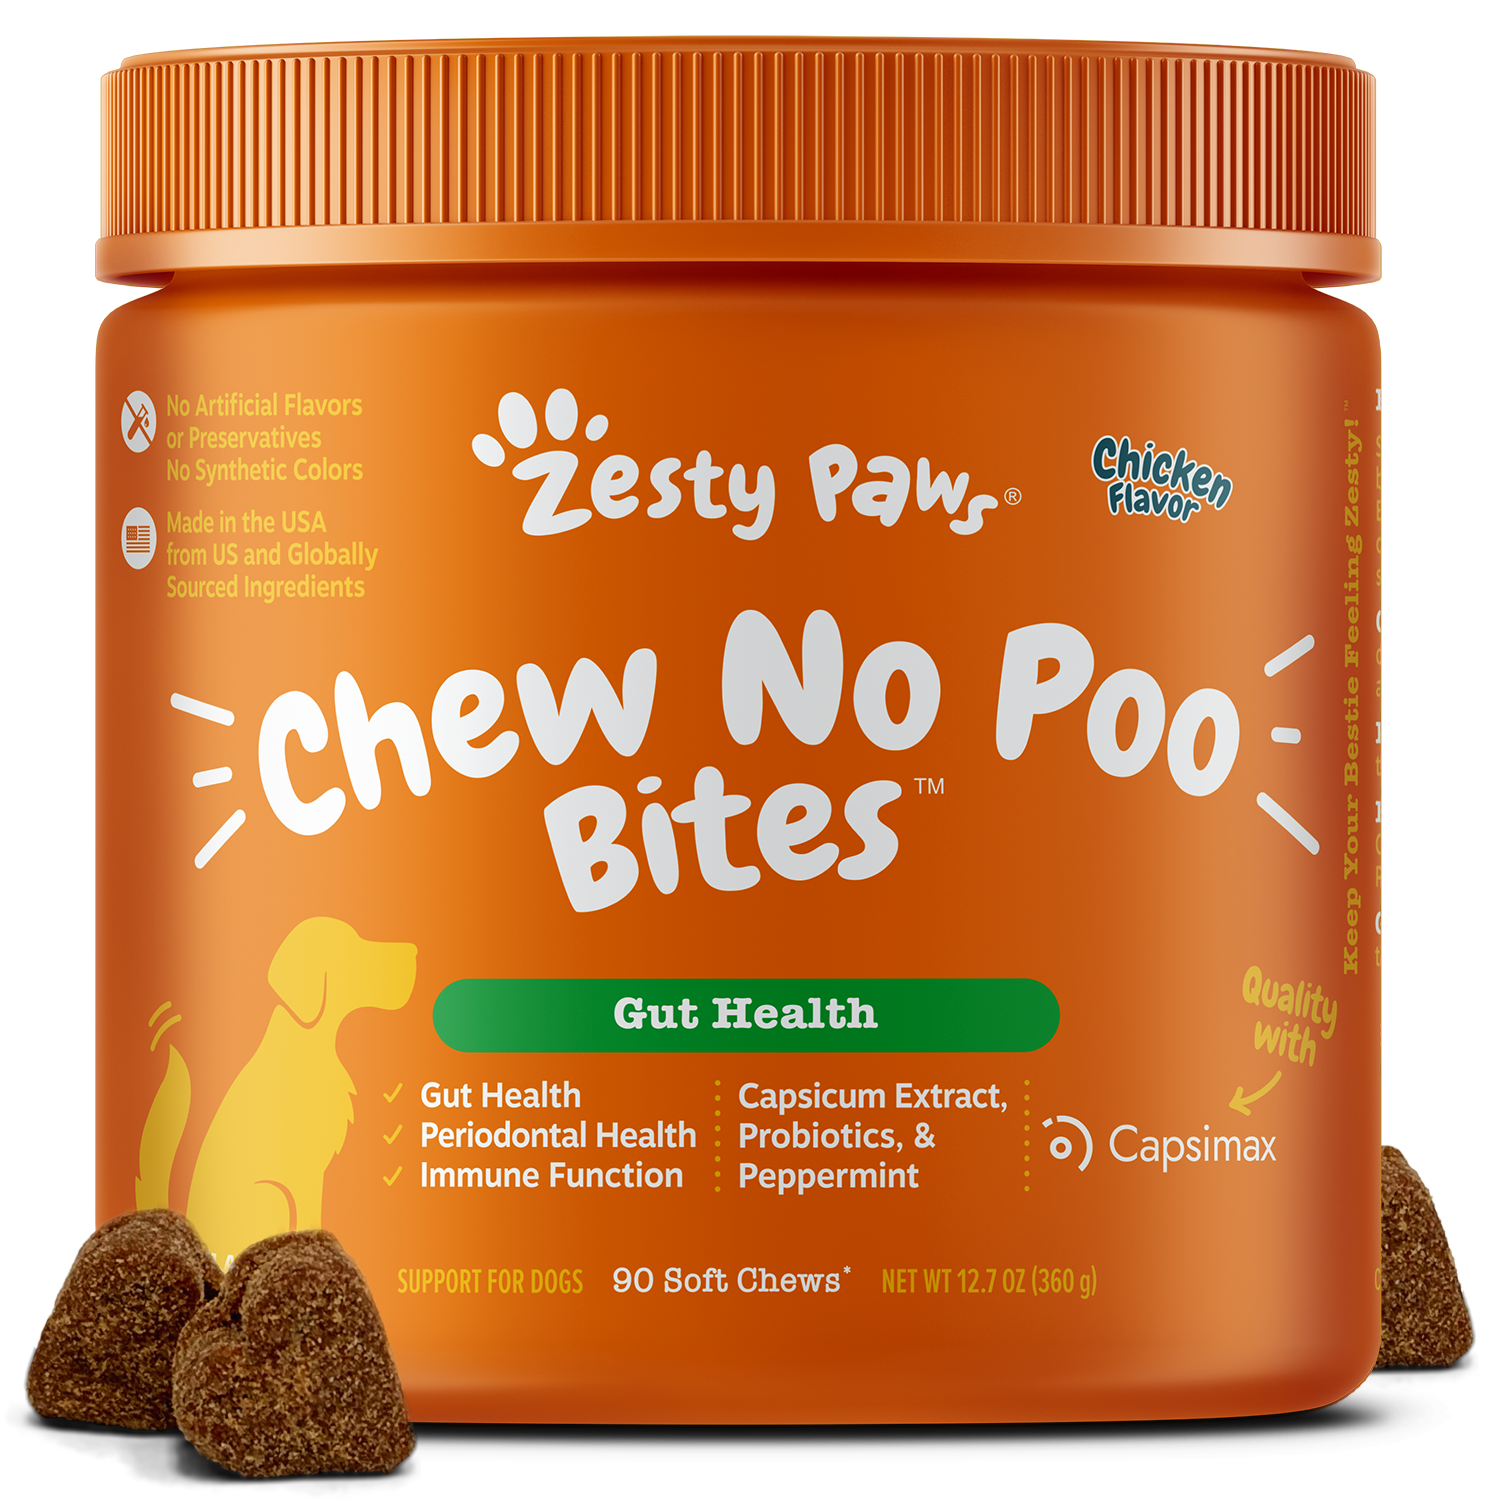 Chew No Poo Bites™ for Dogs